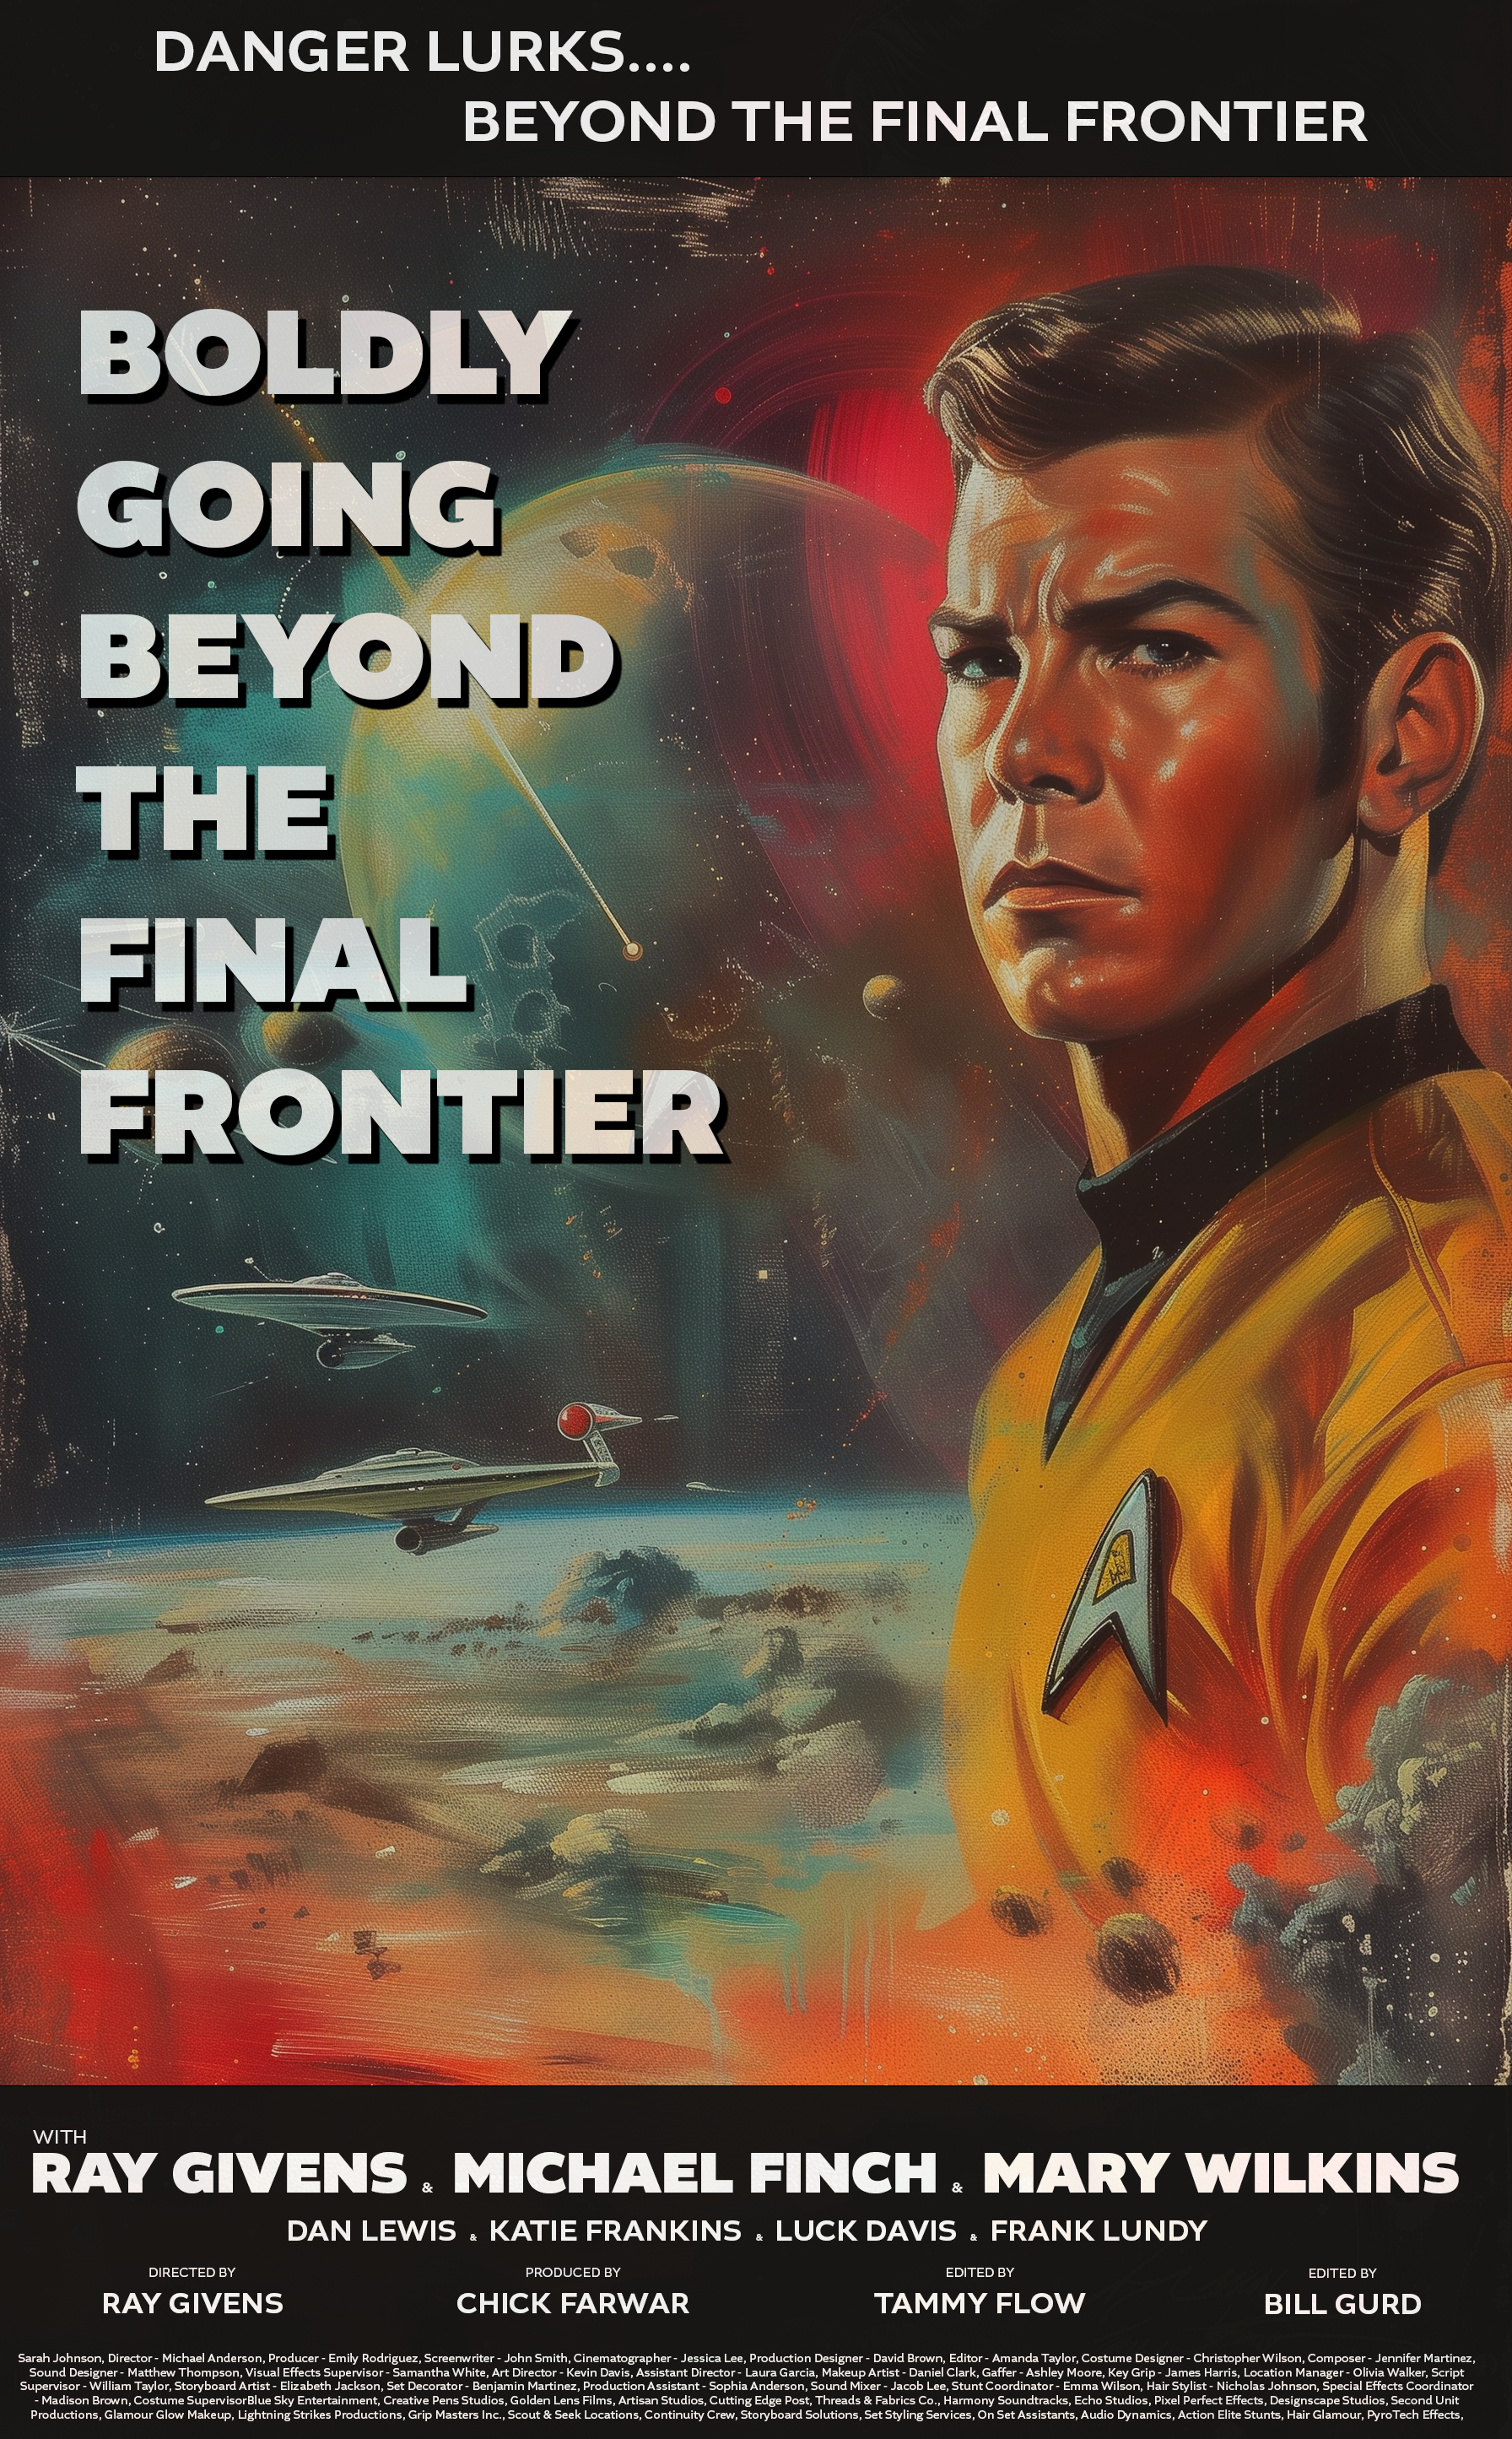 Name:  Beyond the Final Frontier.png
Views: 143
Size:  8.19 MB